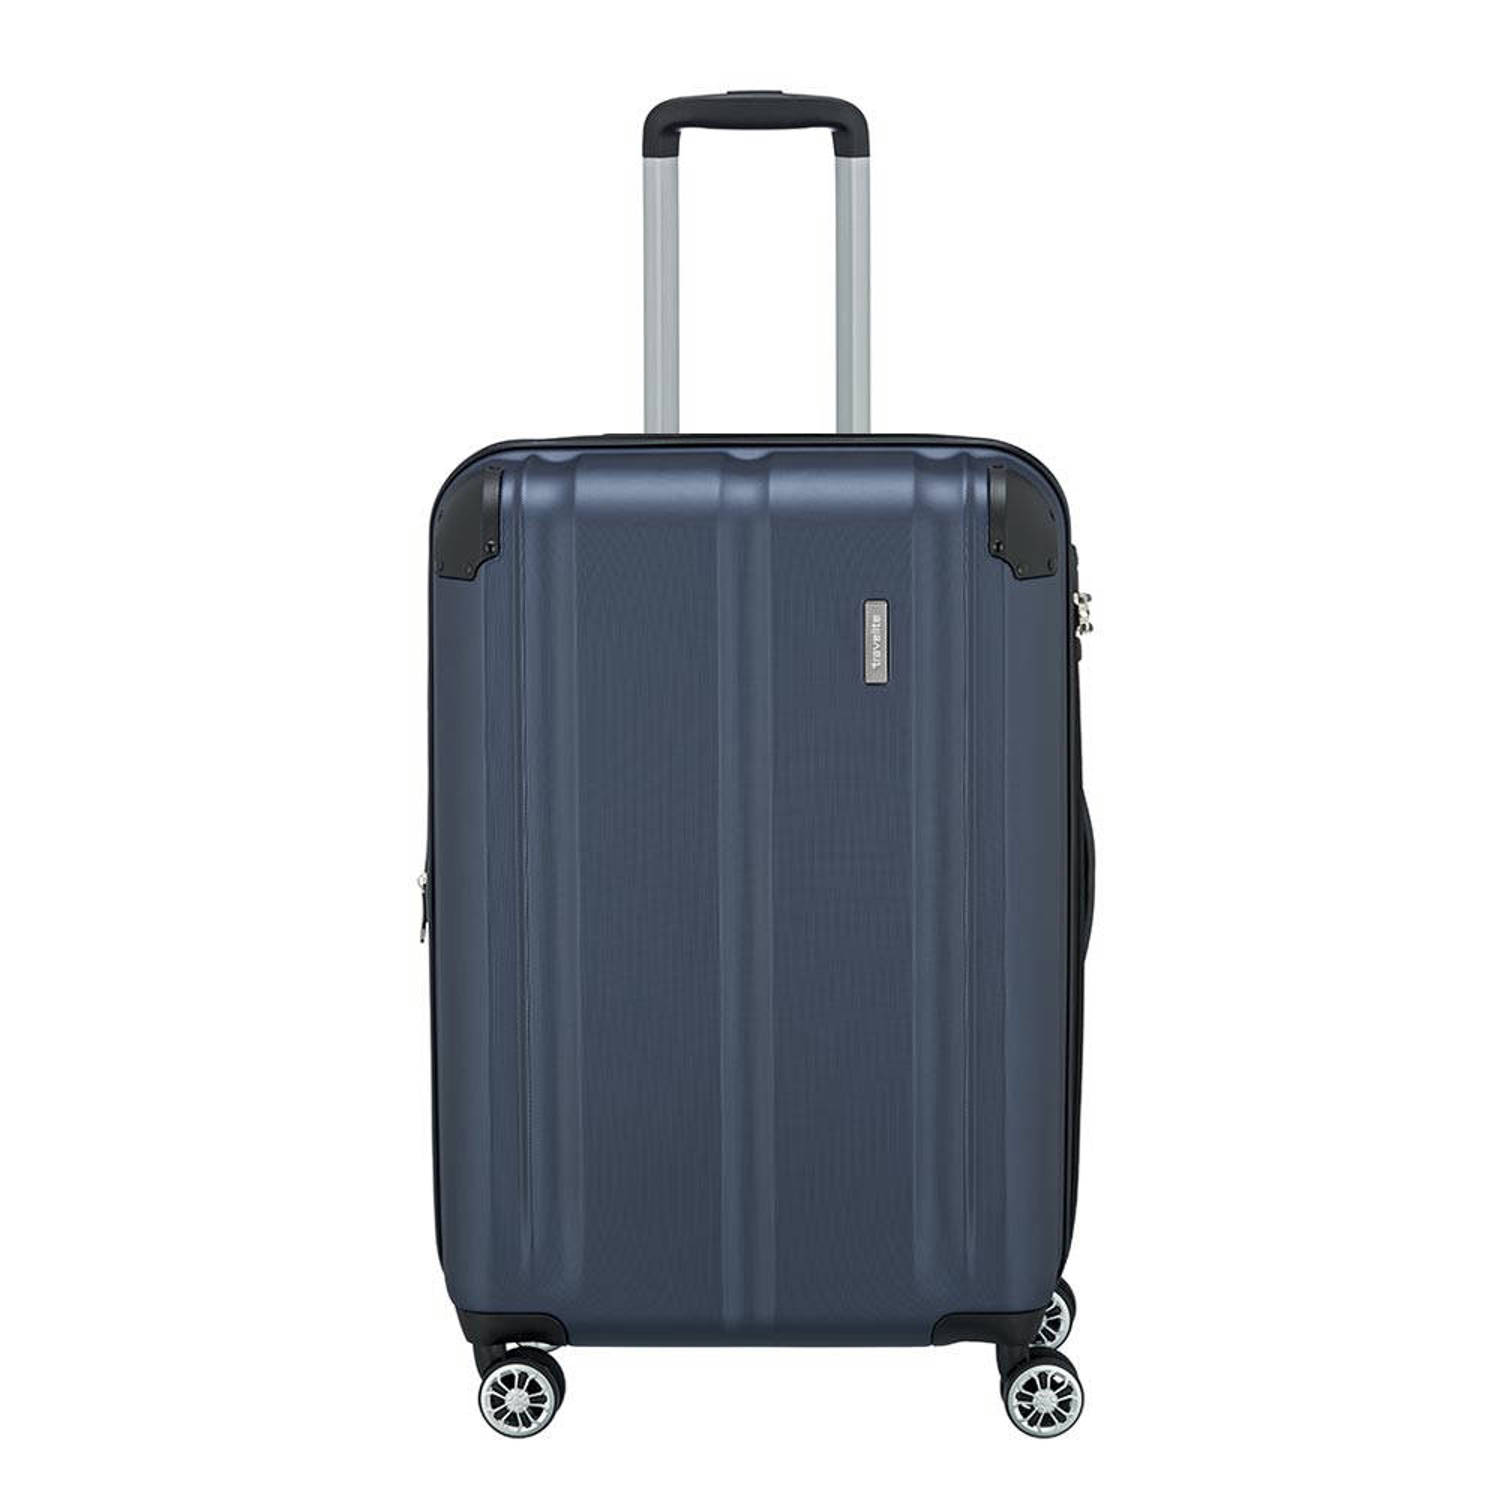 Travelite trolley City 68 cm. Expandable donkerblauw